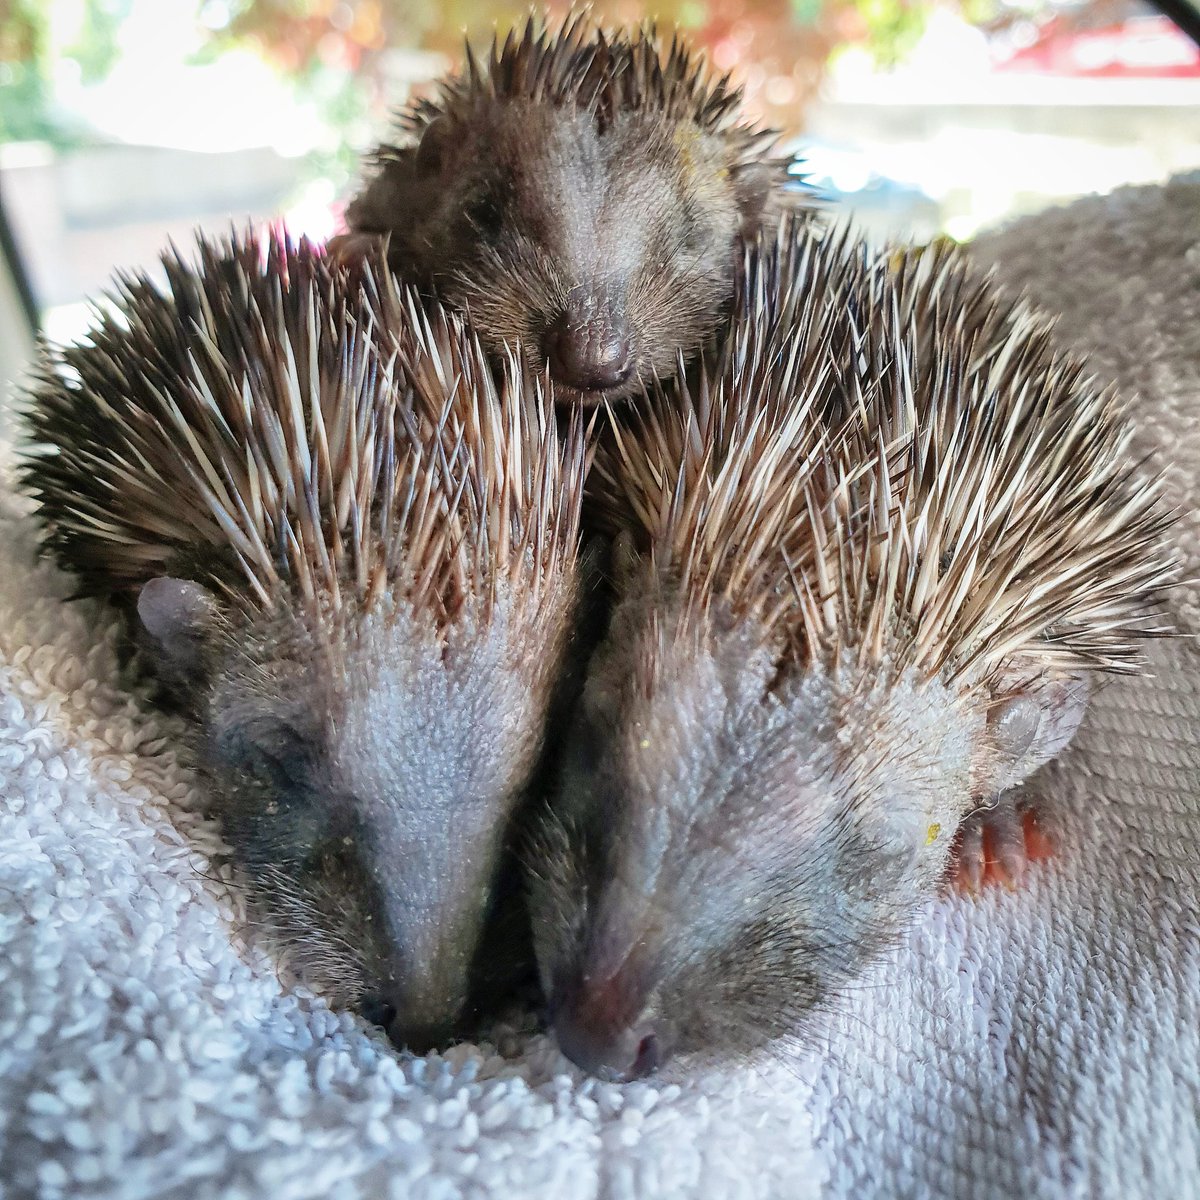 Please #helpthehedgehogs in the heatwave, we're collecting lots of hungry & dehydrated #hedgehogs & #hoglets in this weather, as it's hard for them to find food & water. Follow this link on how to help &leave food/water in shallow dishes rspca.org.uk/adviceandwelfa… @RSPCA_official 49